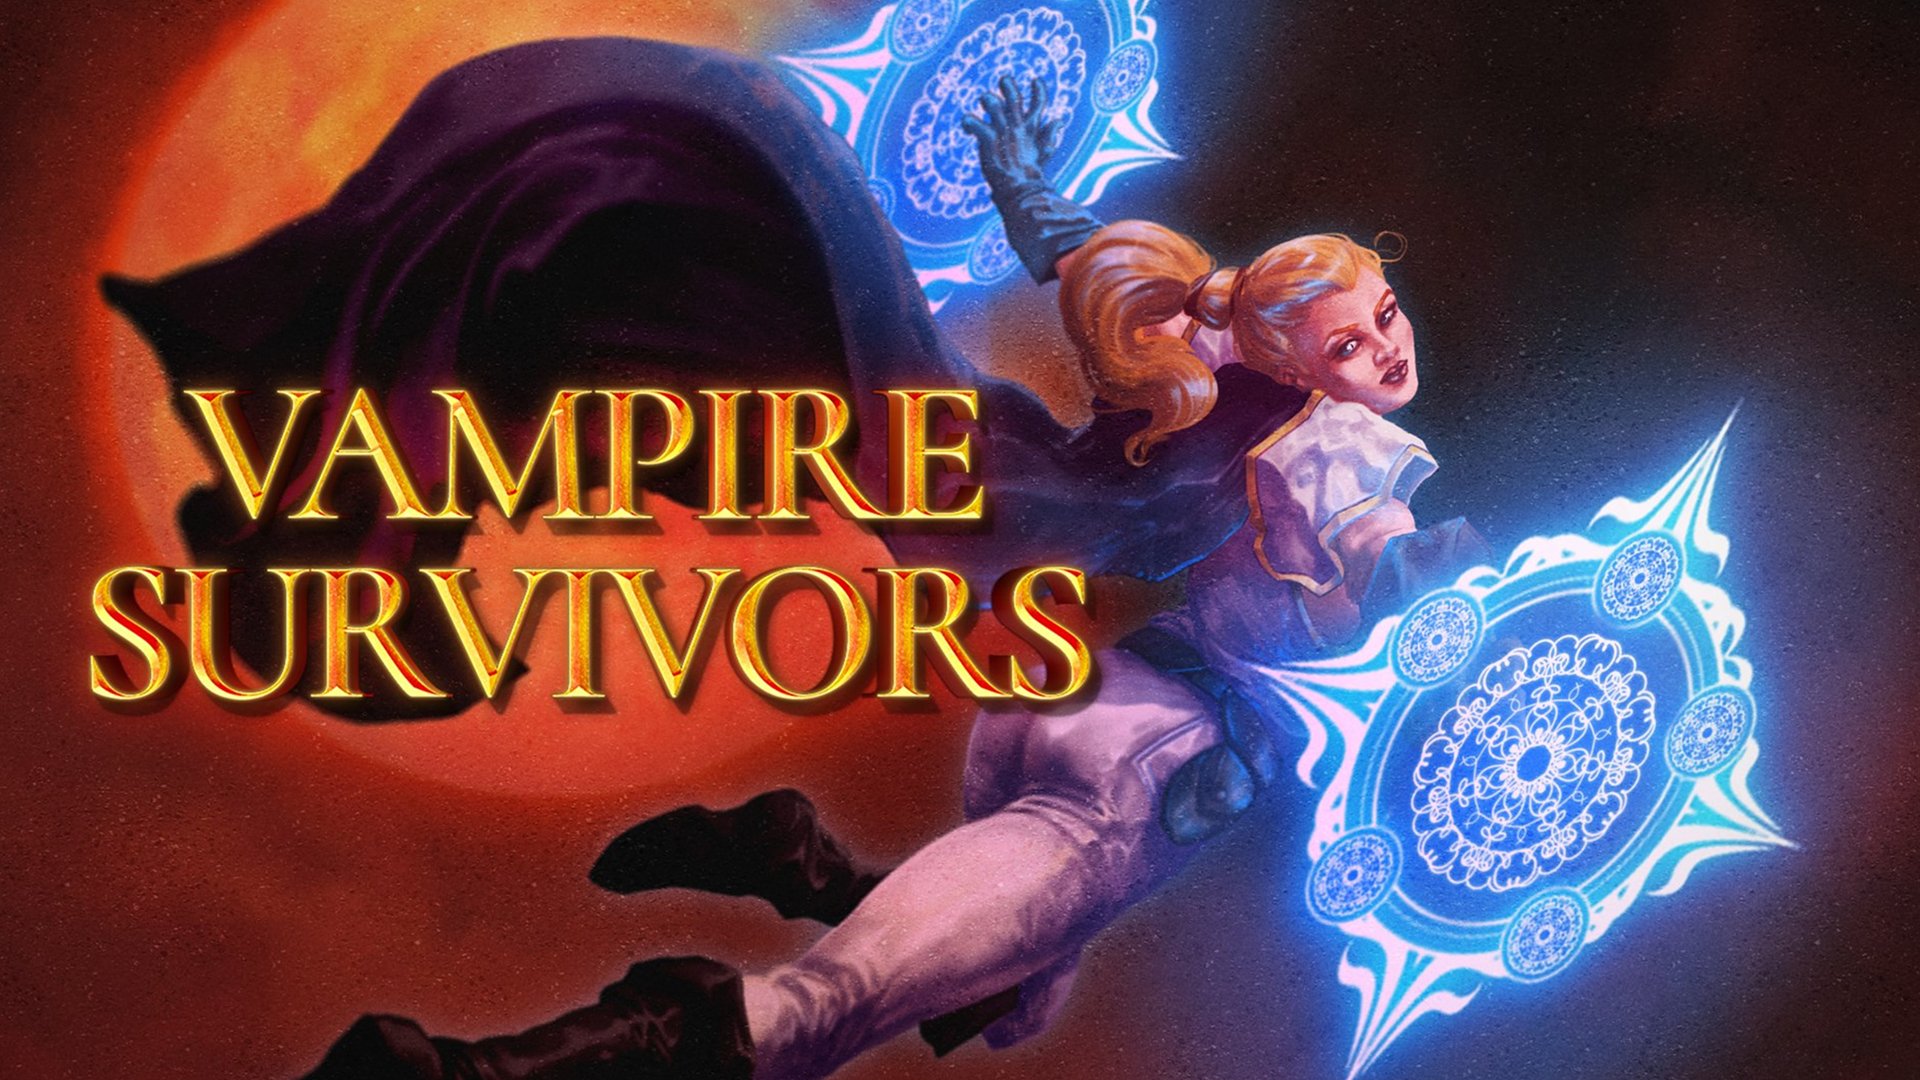 Vampire Survivors is coming to Xbox this month and it will be on Game